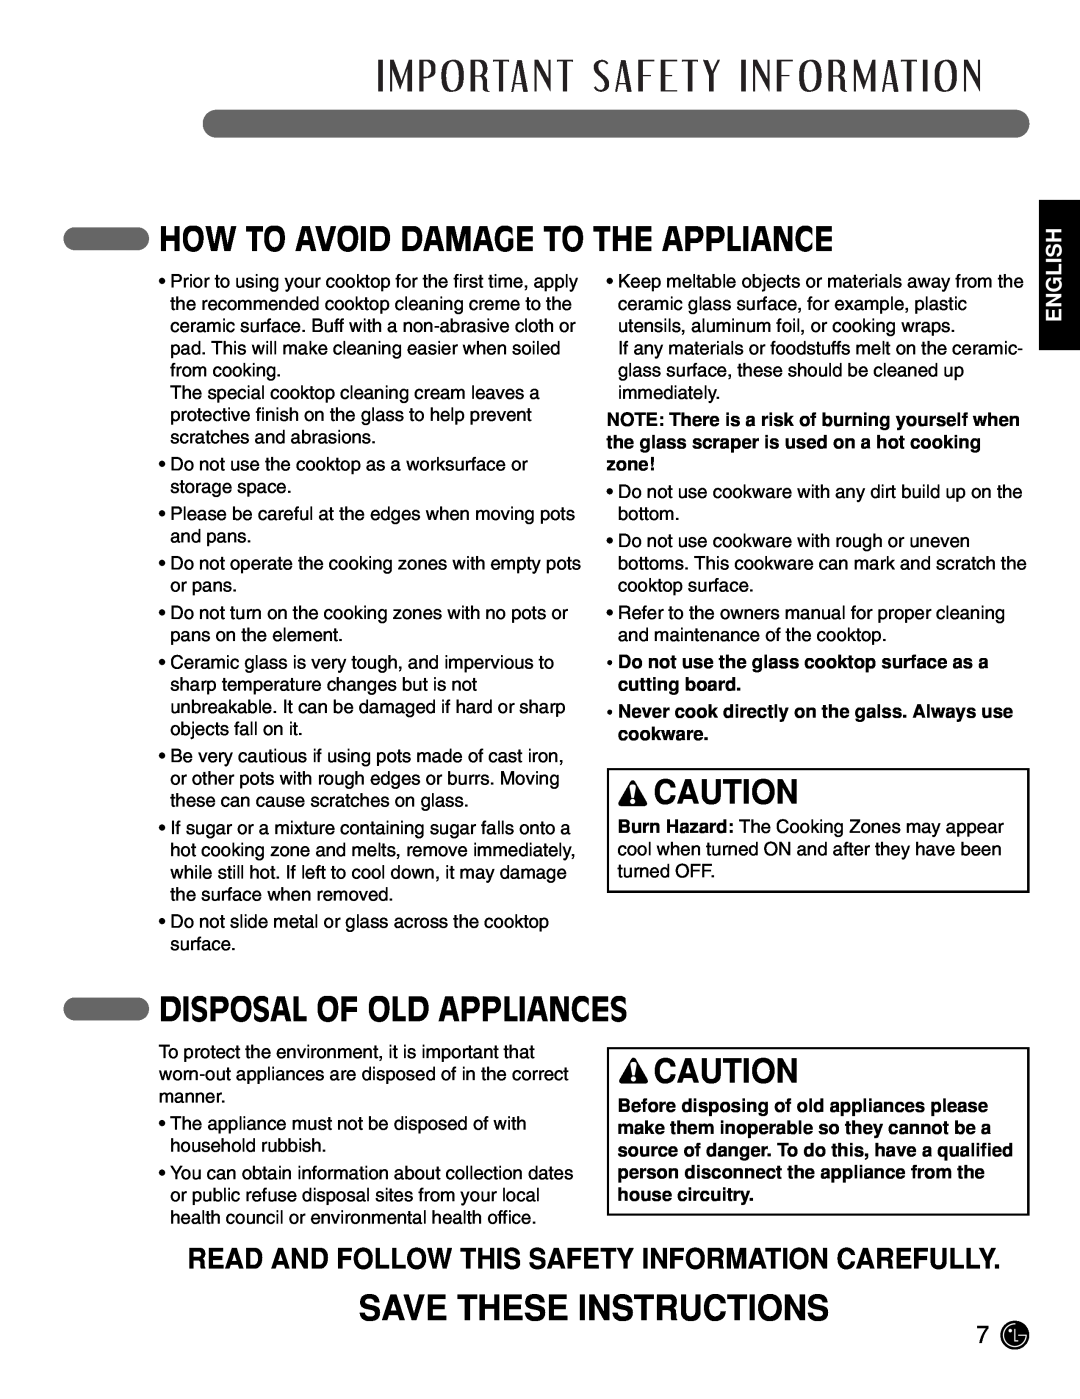 LG Electronics LCE3081ST manual Save These Instructions, How To Avoid Damage To The Appliance, Disposal Of Old Appliances 